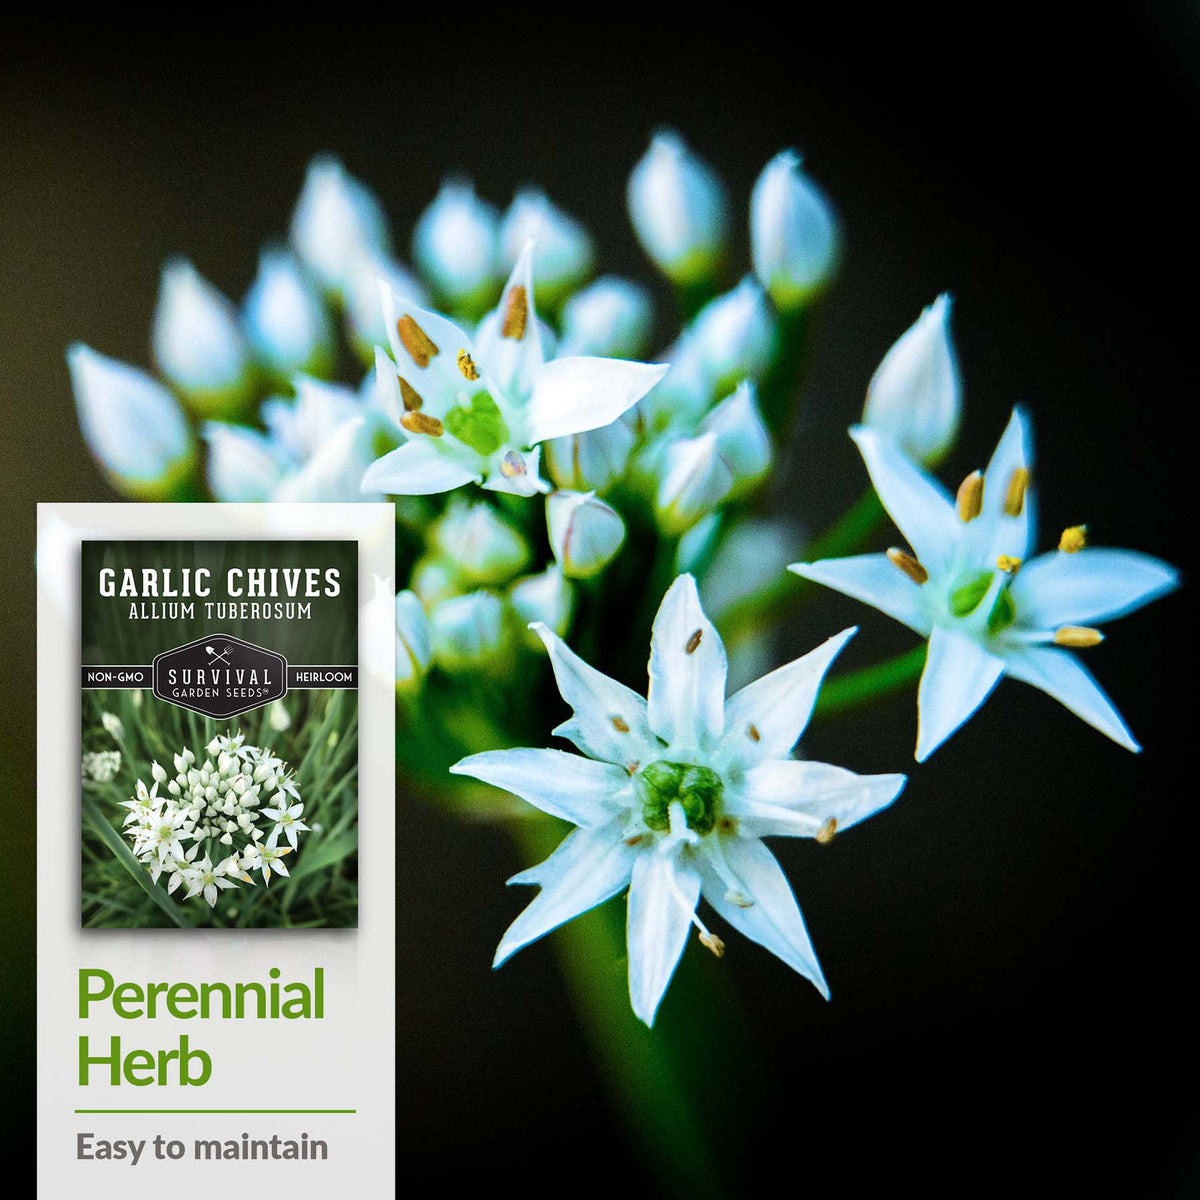 Garlic chives are an easy to maintain perennial herb